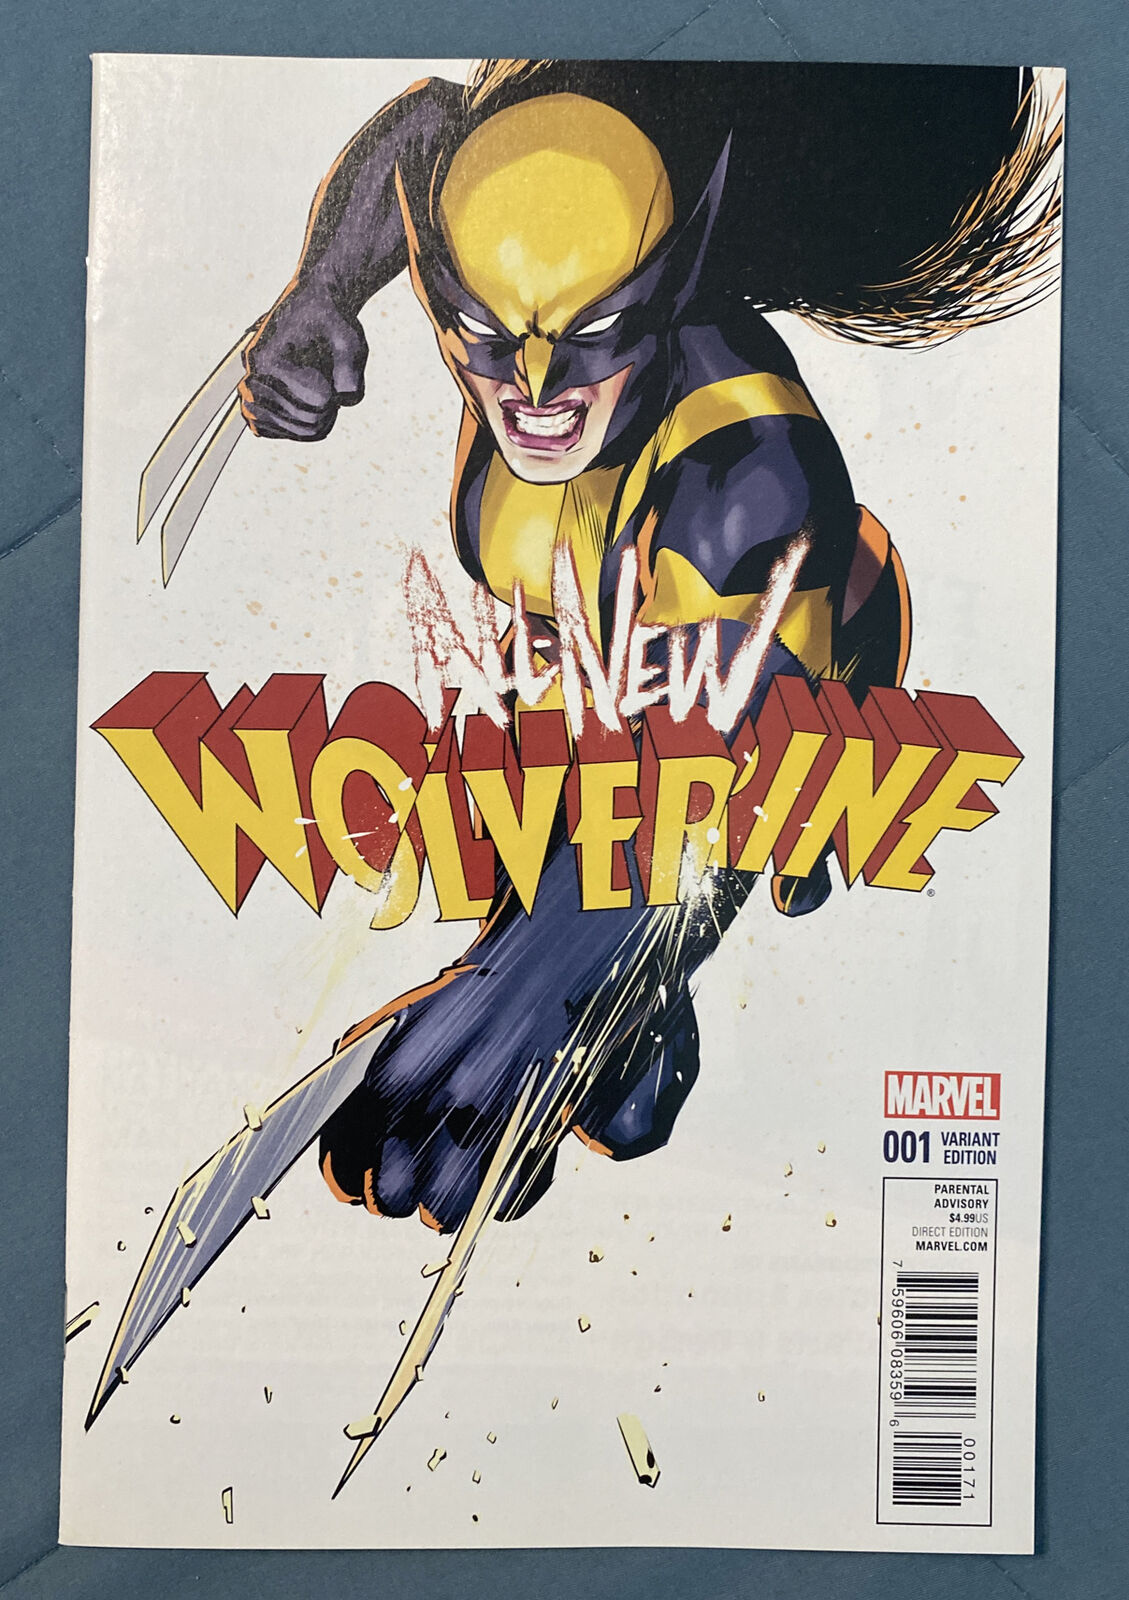 ALL-NEW WOLVERINE #1 DAVID LOPEZ 1:25 VARIANT, 1st LAURA KINNEY AS WOLVERINE